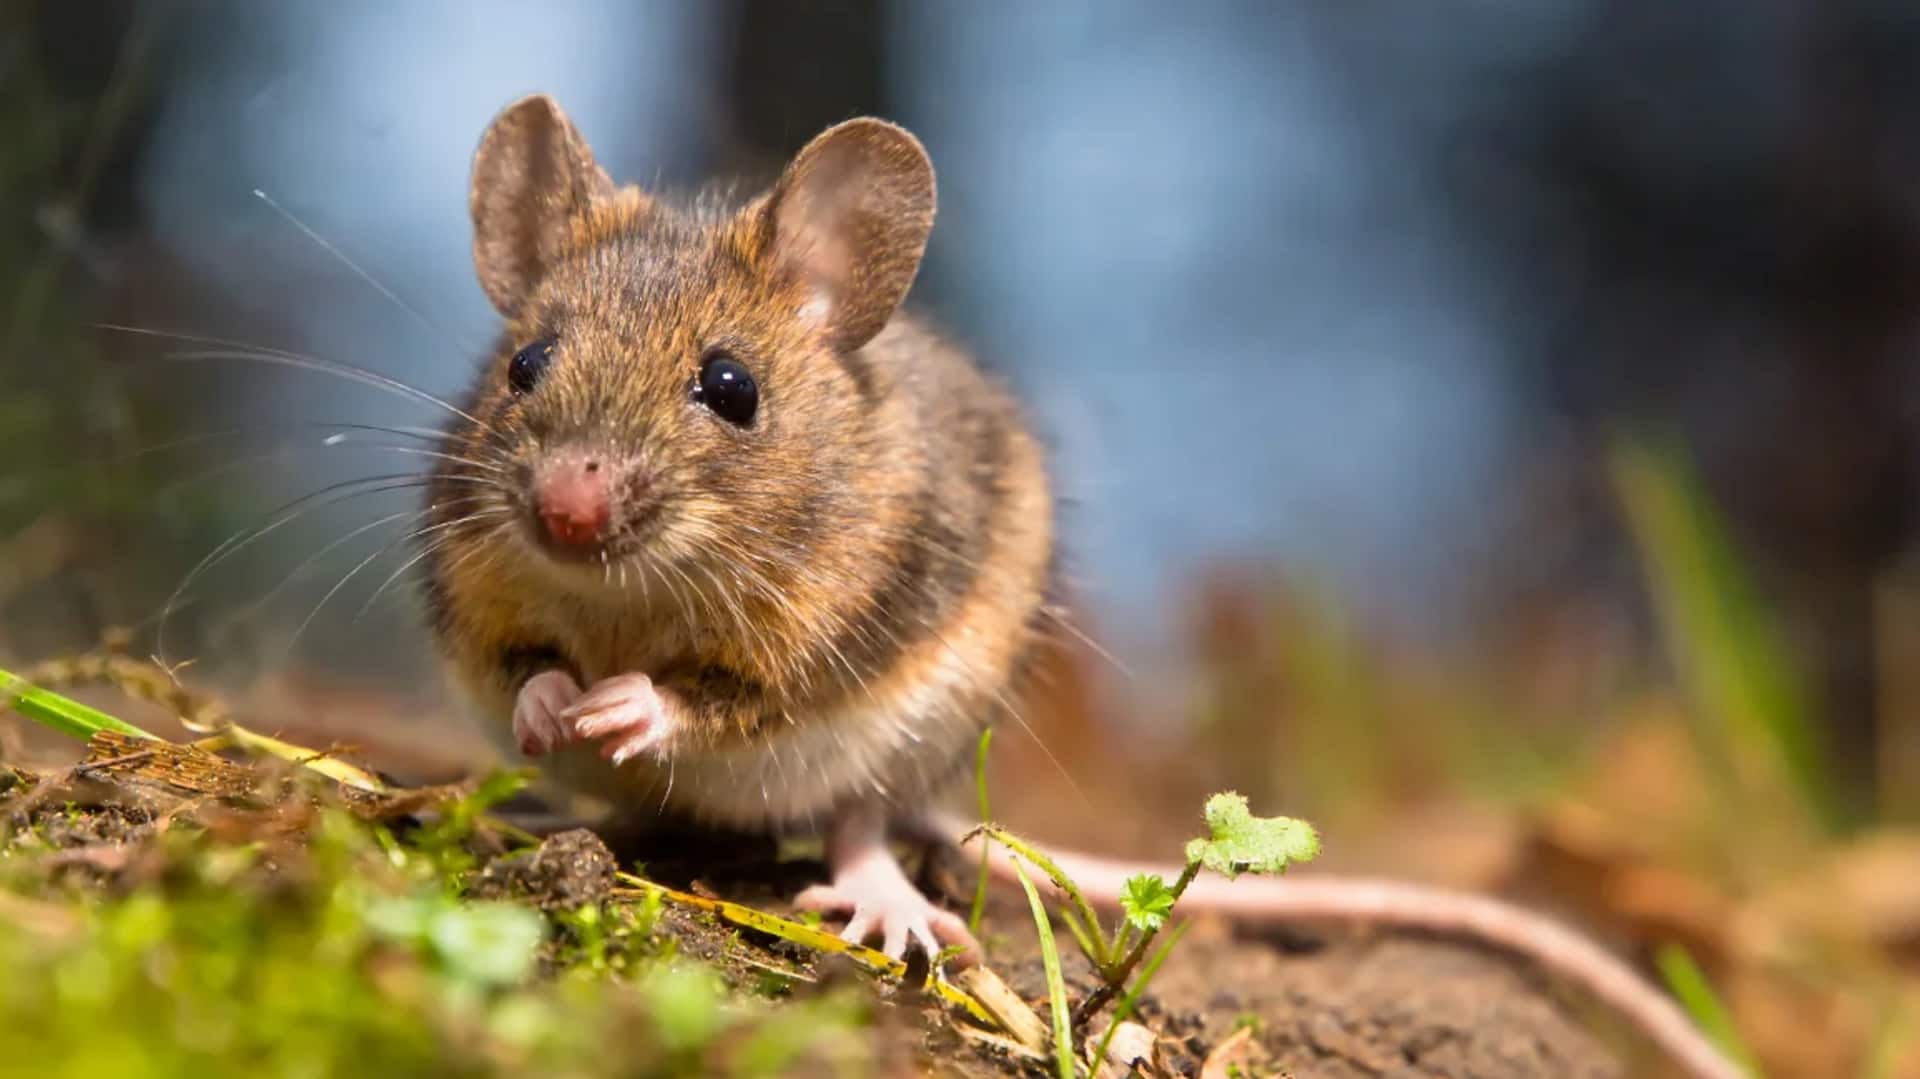 Researchers unintentionally made mouse develop legs in place of genitals